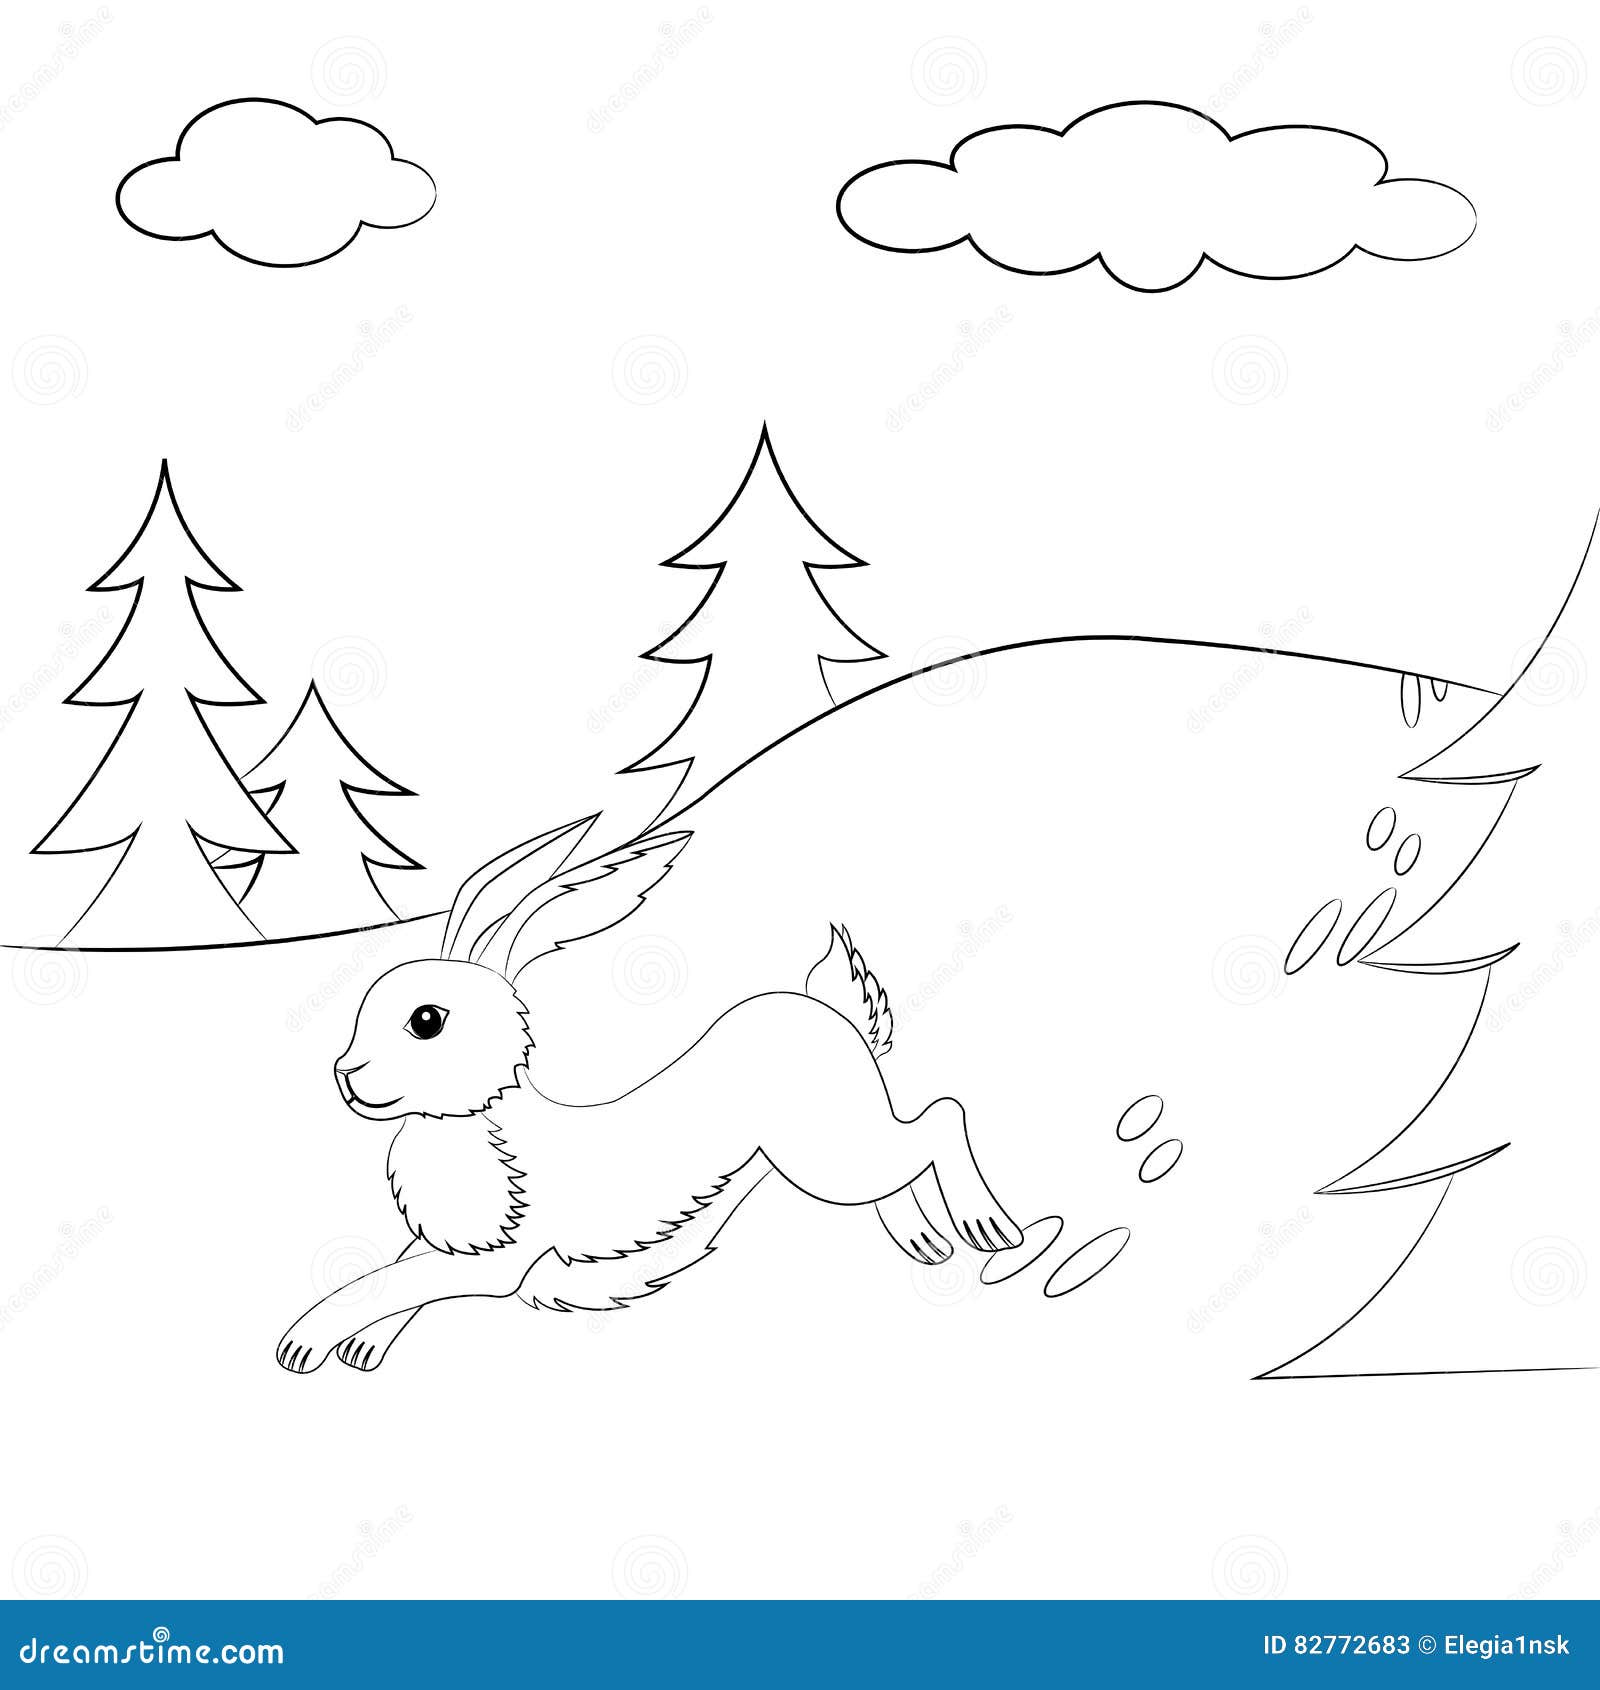 Download Outlined Hare Running In The Forest. Stock Vector - Illustration of mammal, children: 82772683